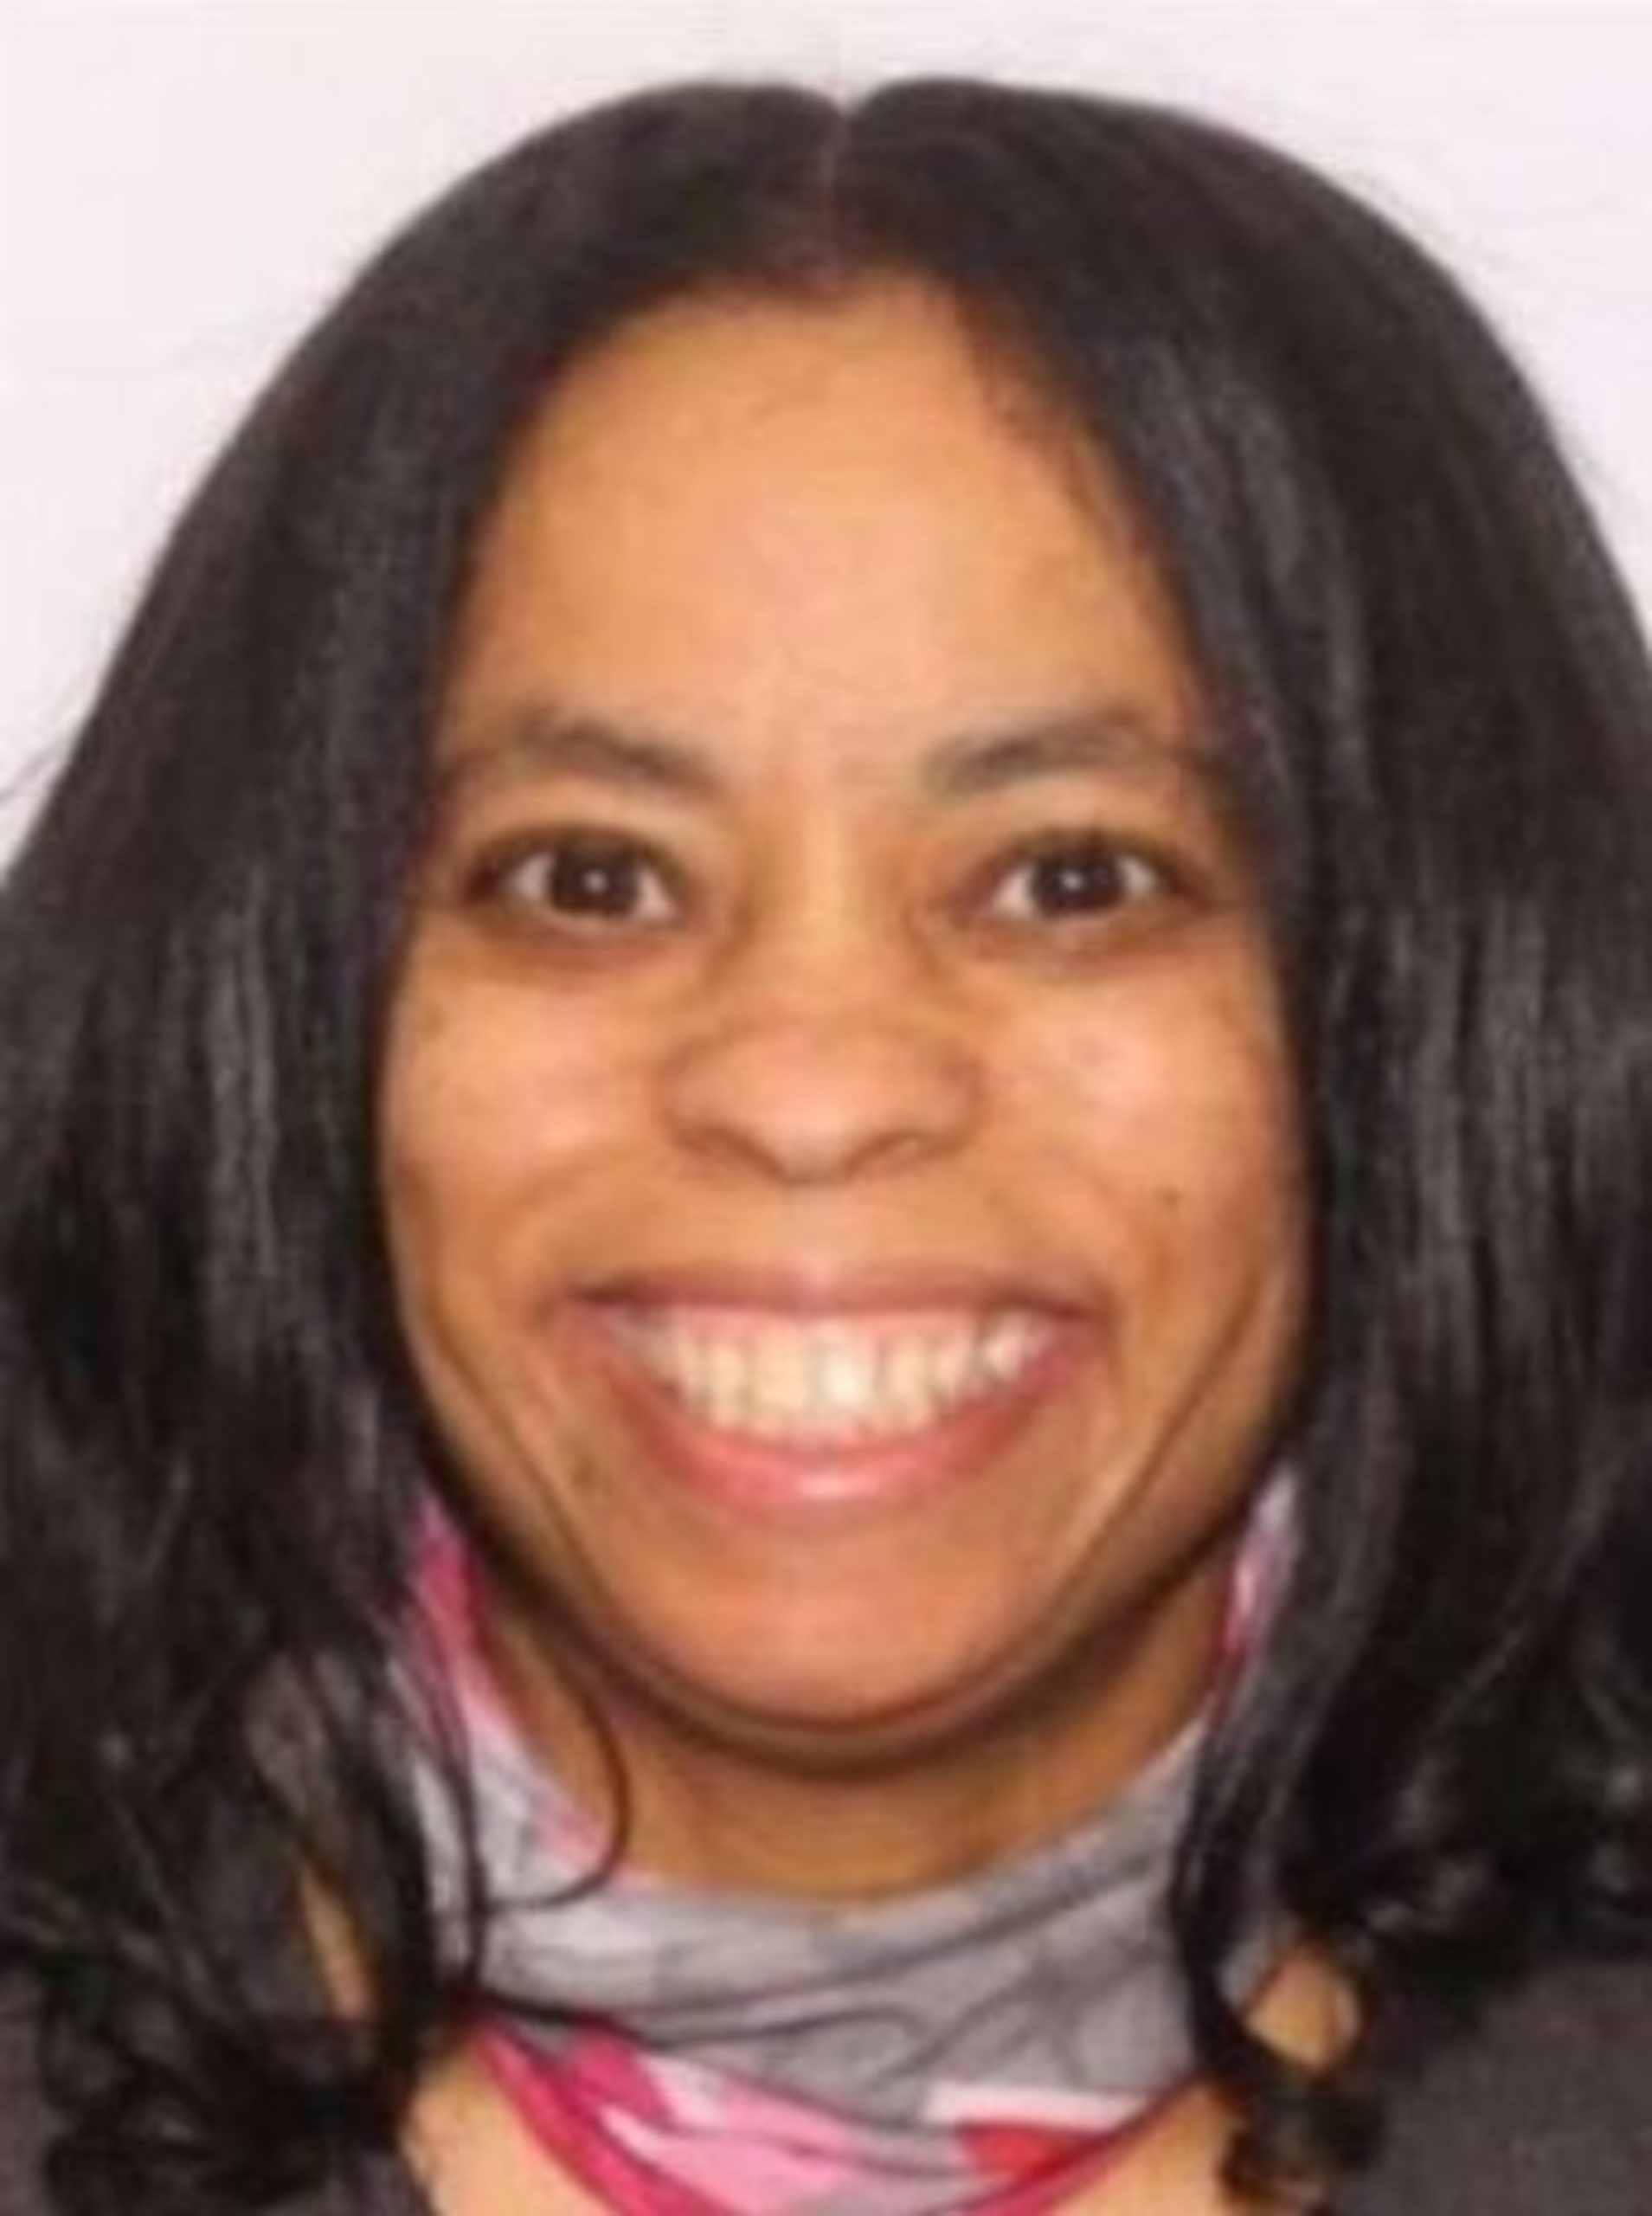 Police report: Foster mother abducts Ohio 5-year-old, child's safety at risk